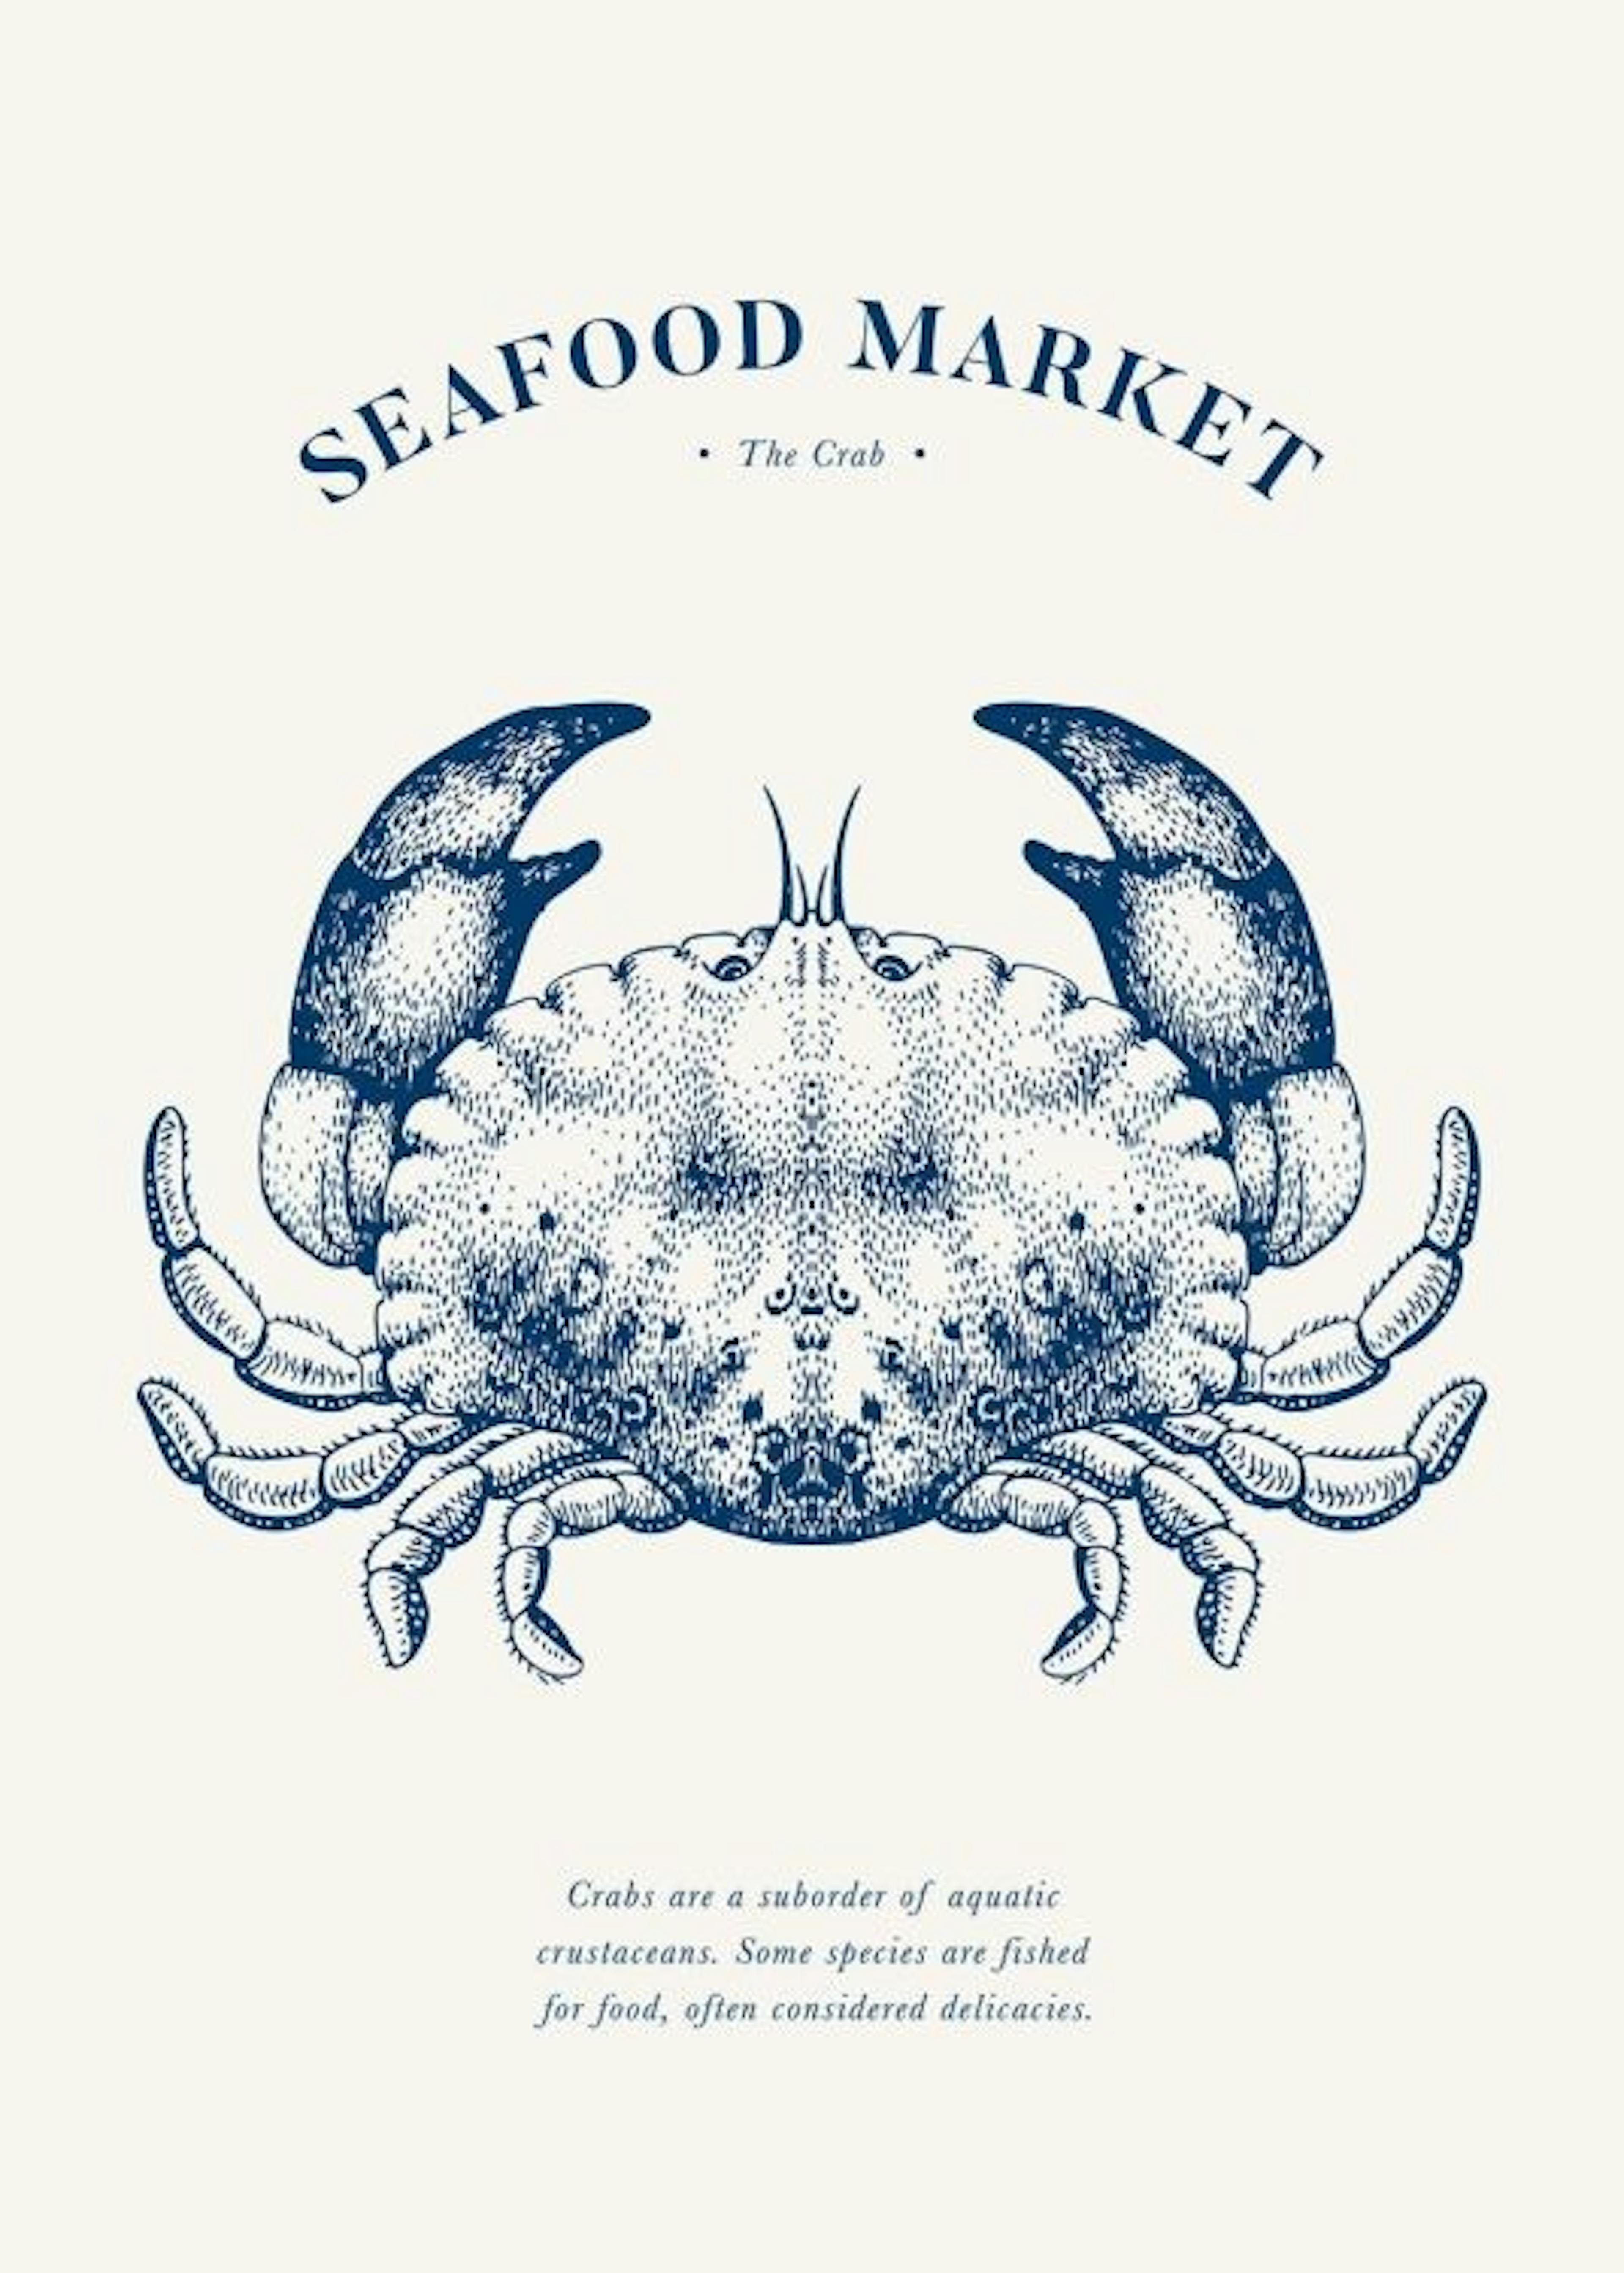 Seafood Market - The Crab Affiche